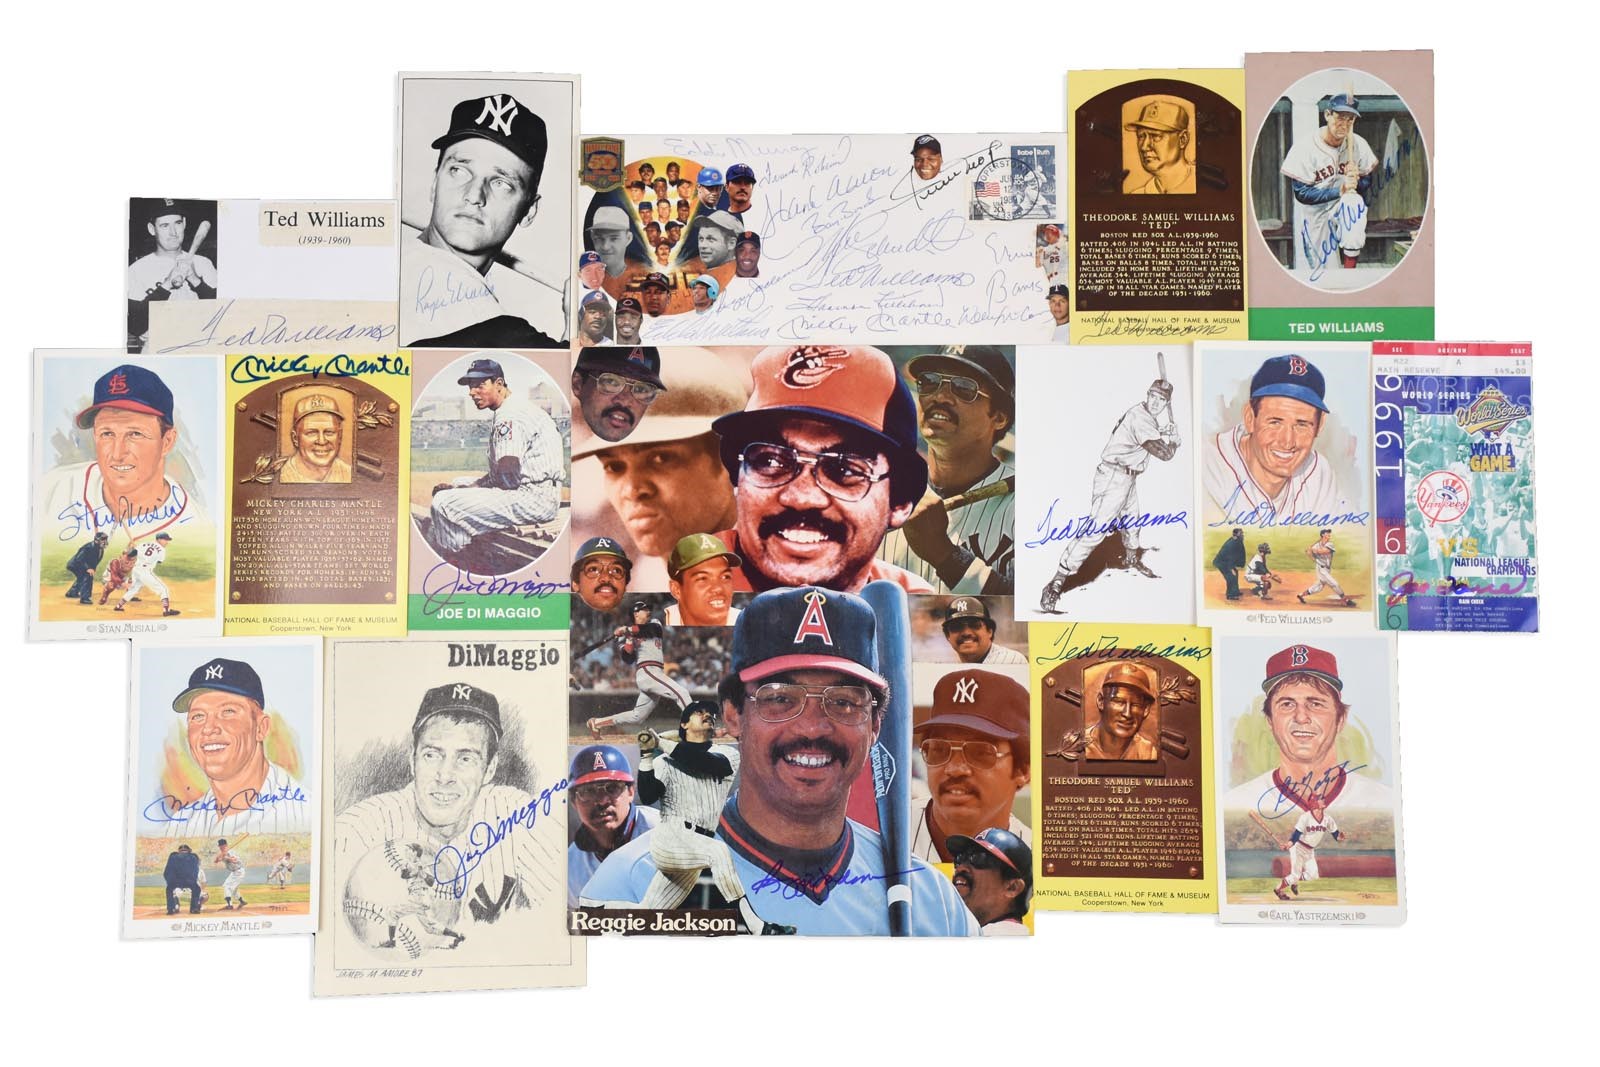 - Hall of Famers and Stars Autograph Collection - (5) Mantle (9), Williams, Maris (250+)